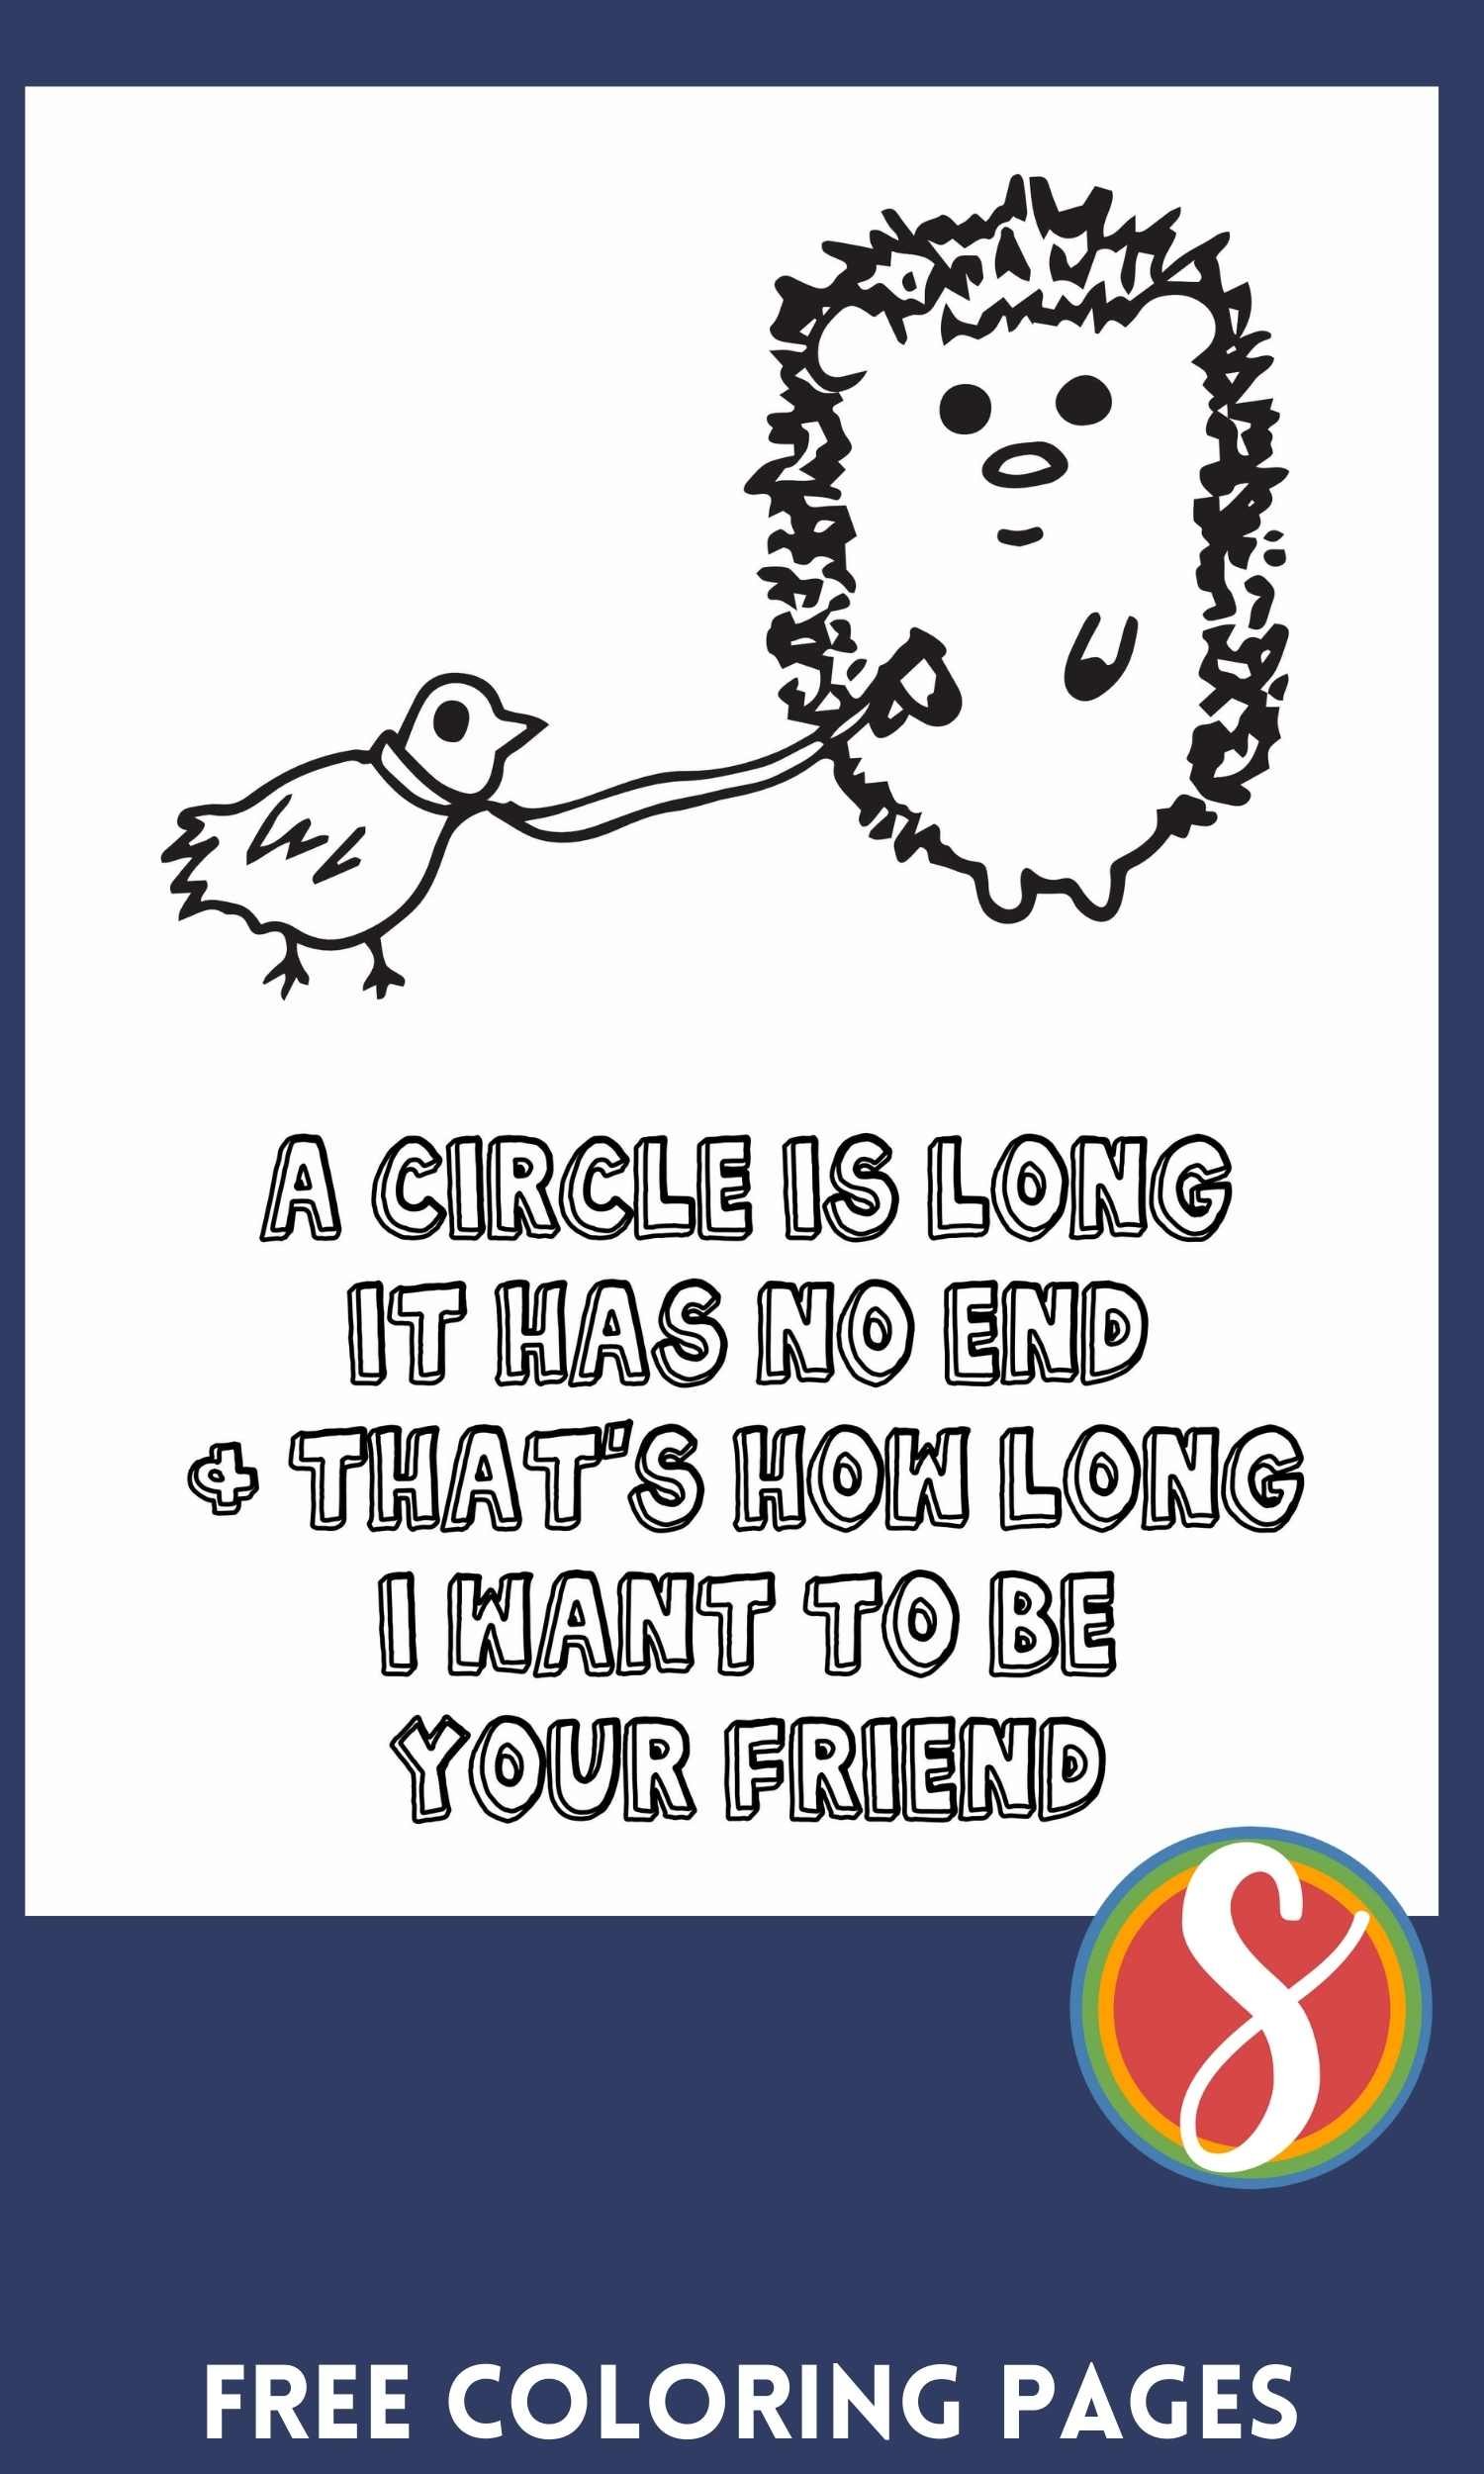 a hedgehog coloring page, small hedgehog walking a duck on a leash with friendship quote underneath